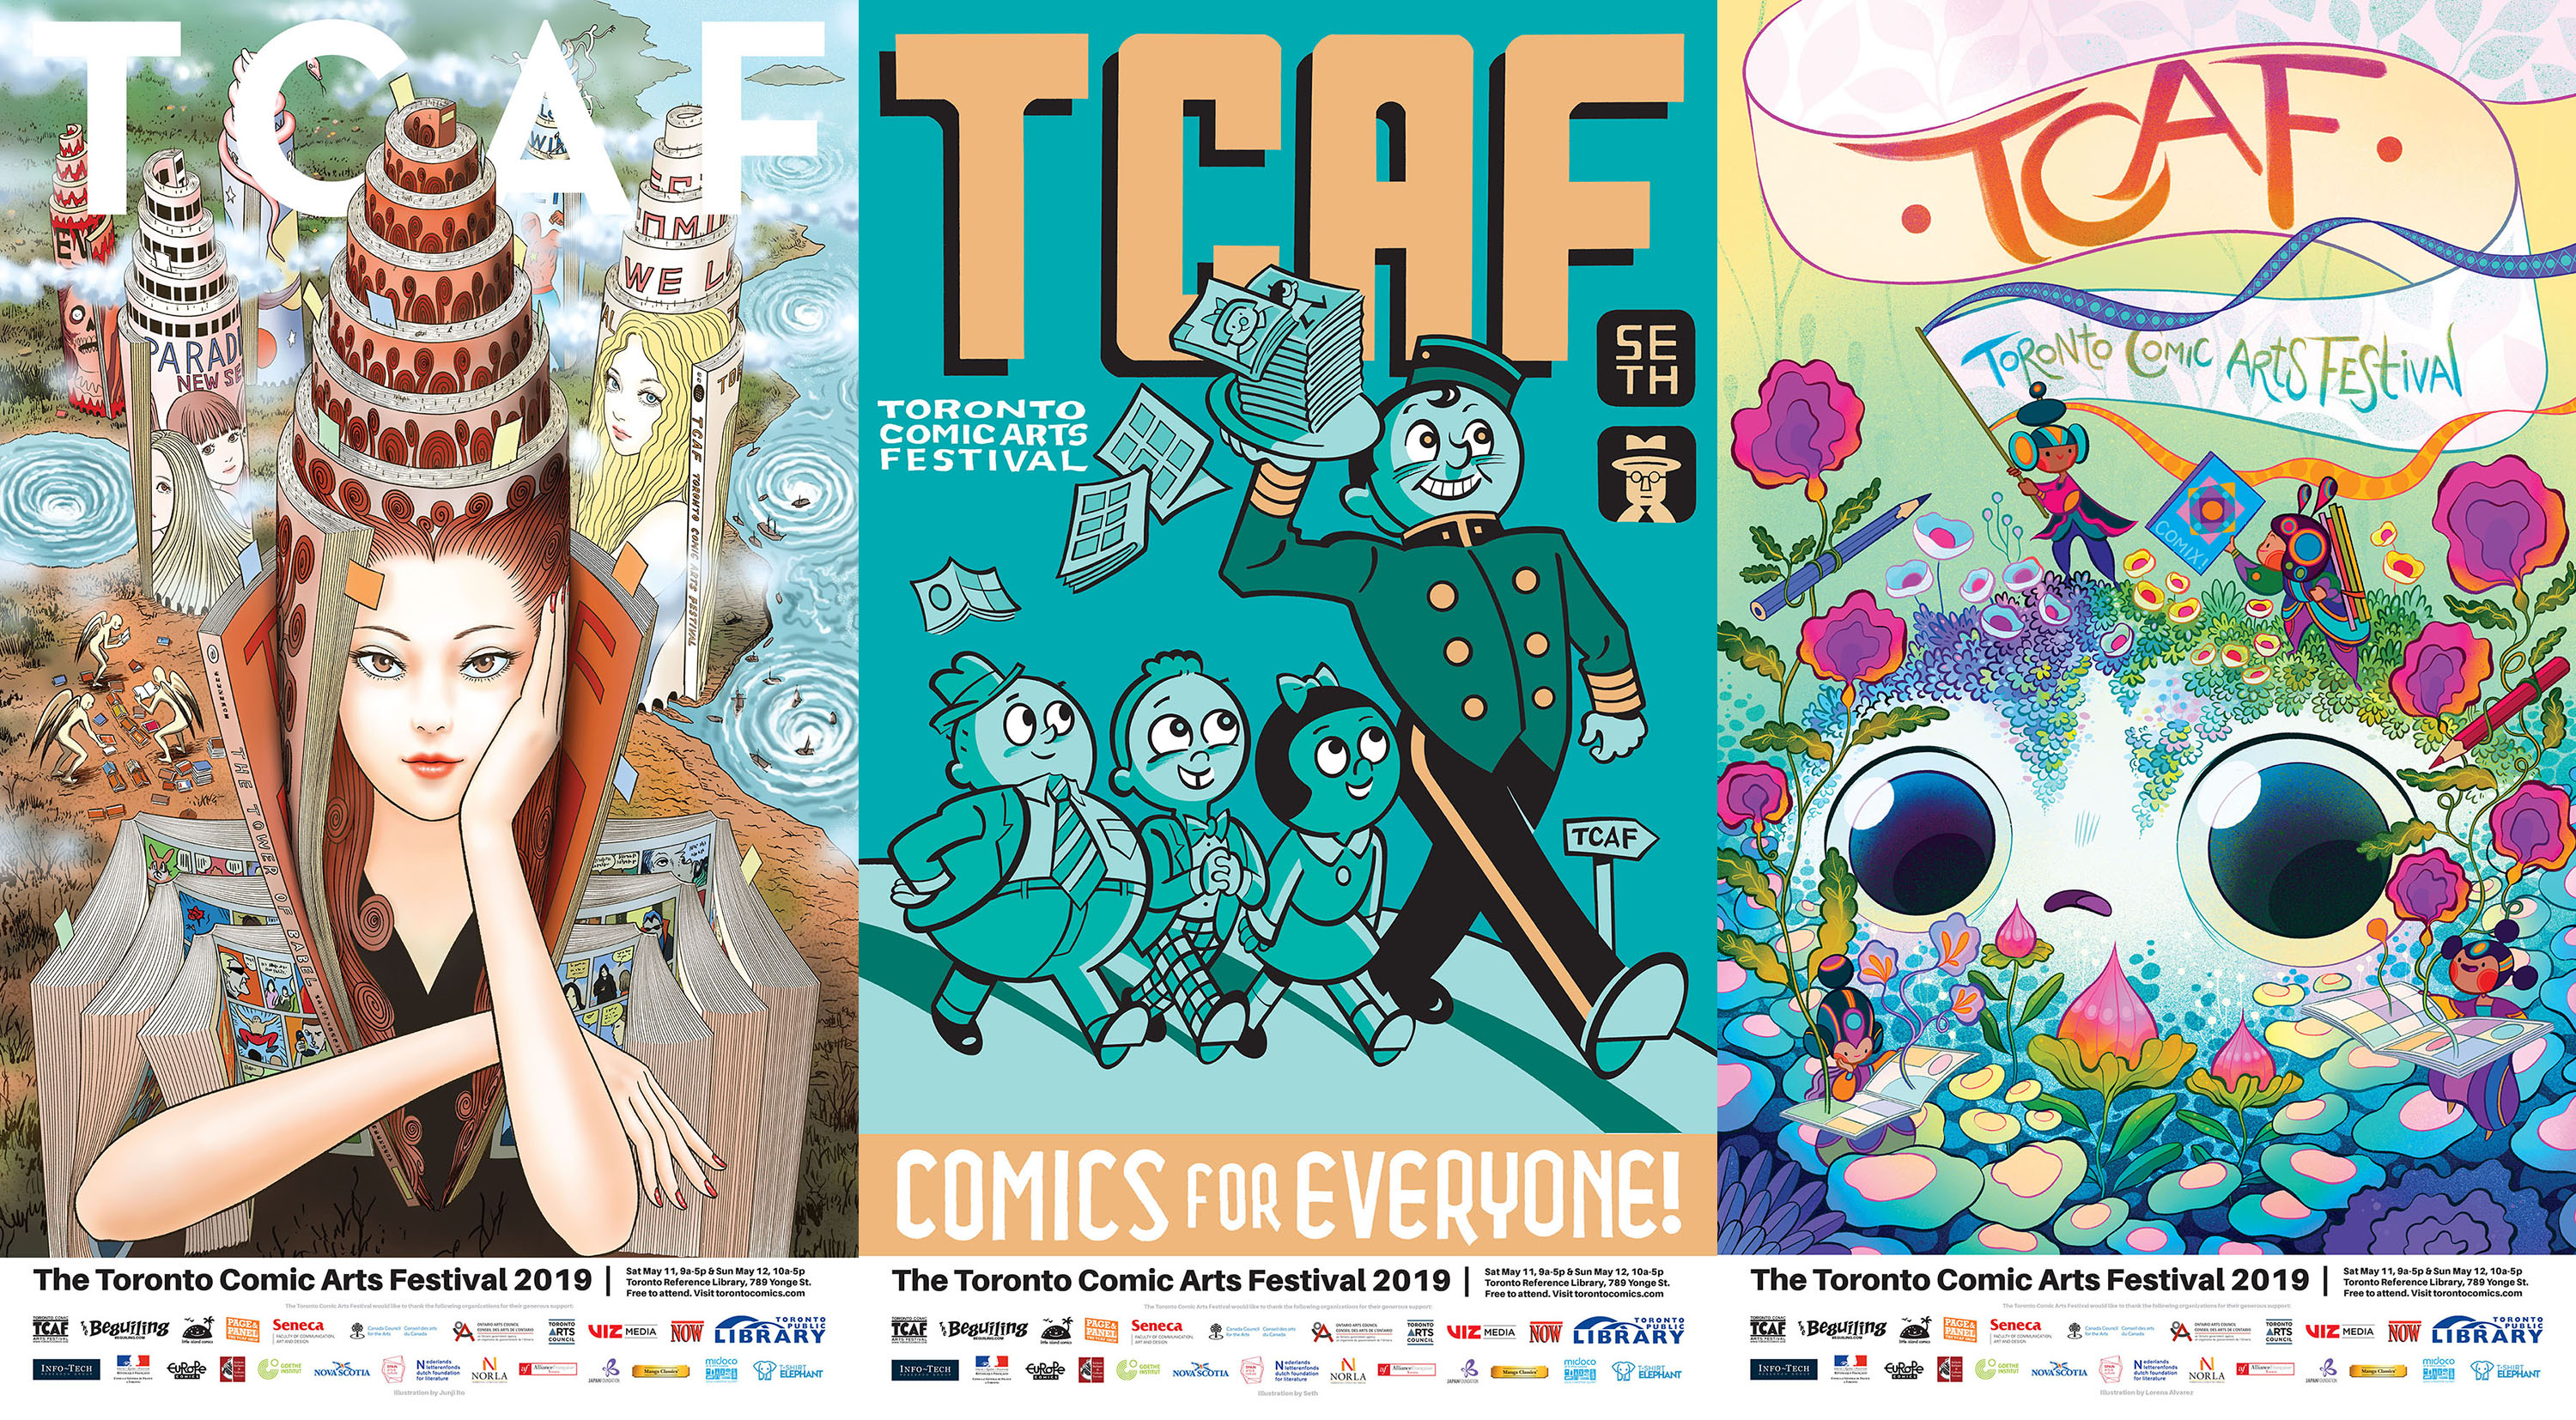 TCAF 2019 Posters (complete set)